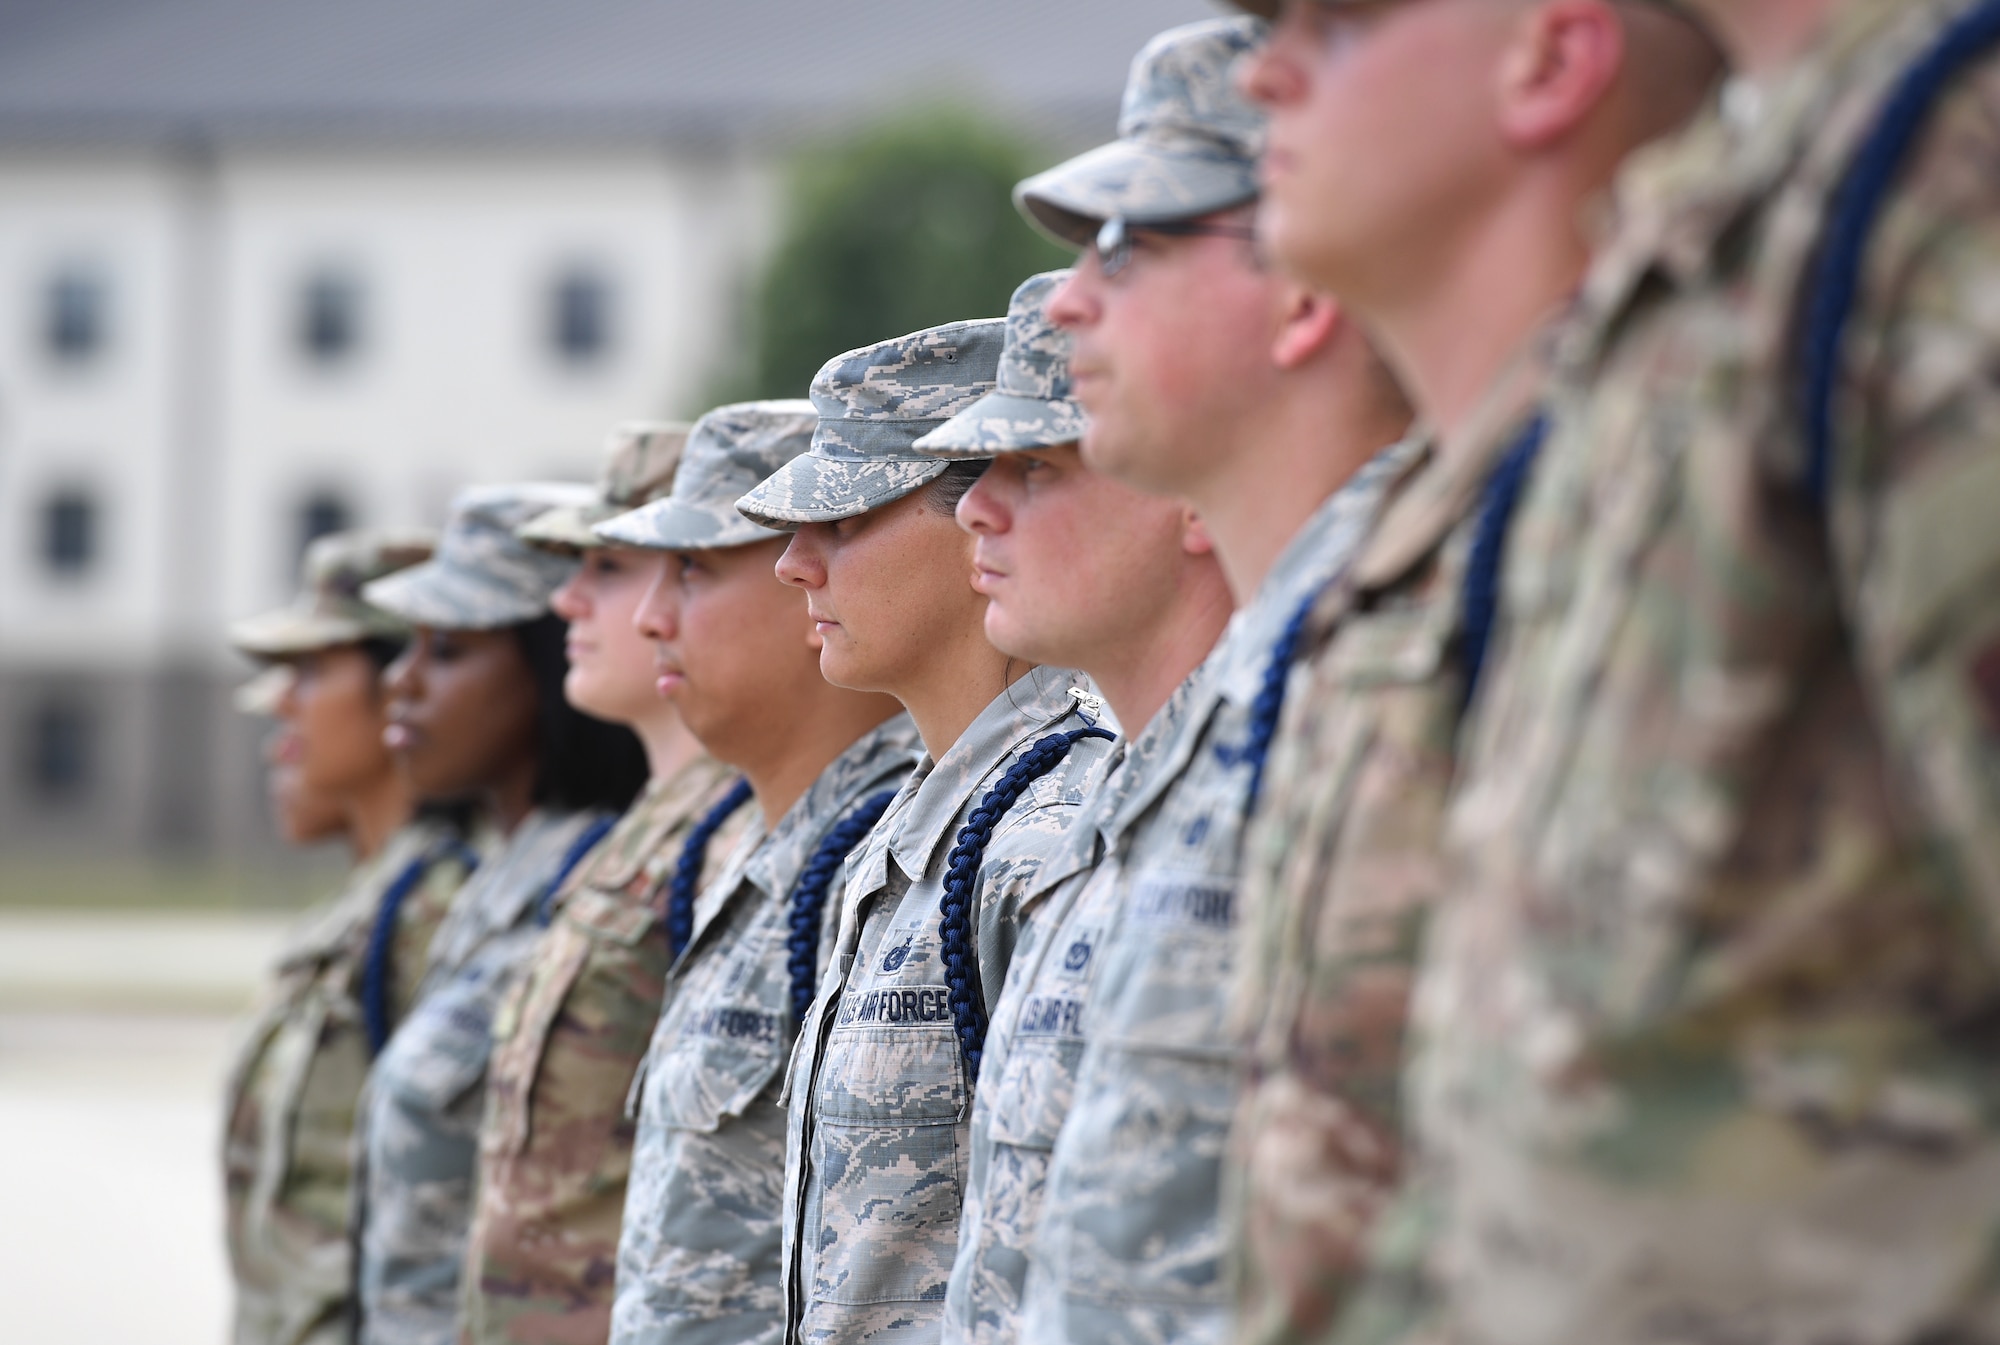 Airmen stand in formation during a Military Training Leader course graduation ceremony at the Levitow Training Support Facility on Keesler Air Force Base, Mississippi, May 30, 2019. The MTL course is responsible for training approximately 120 MTLs per year. Those MTLs are then responsible for training approximately 30,000 Airmen in 49 different locations that fall under Air Education and Training Command. (U.S. Air Force photo by Kemberly Groue)